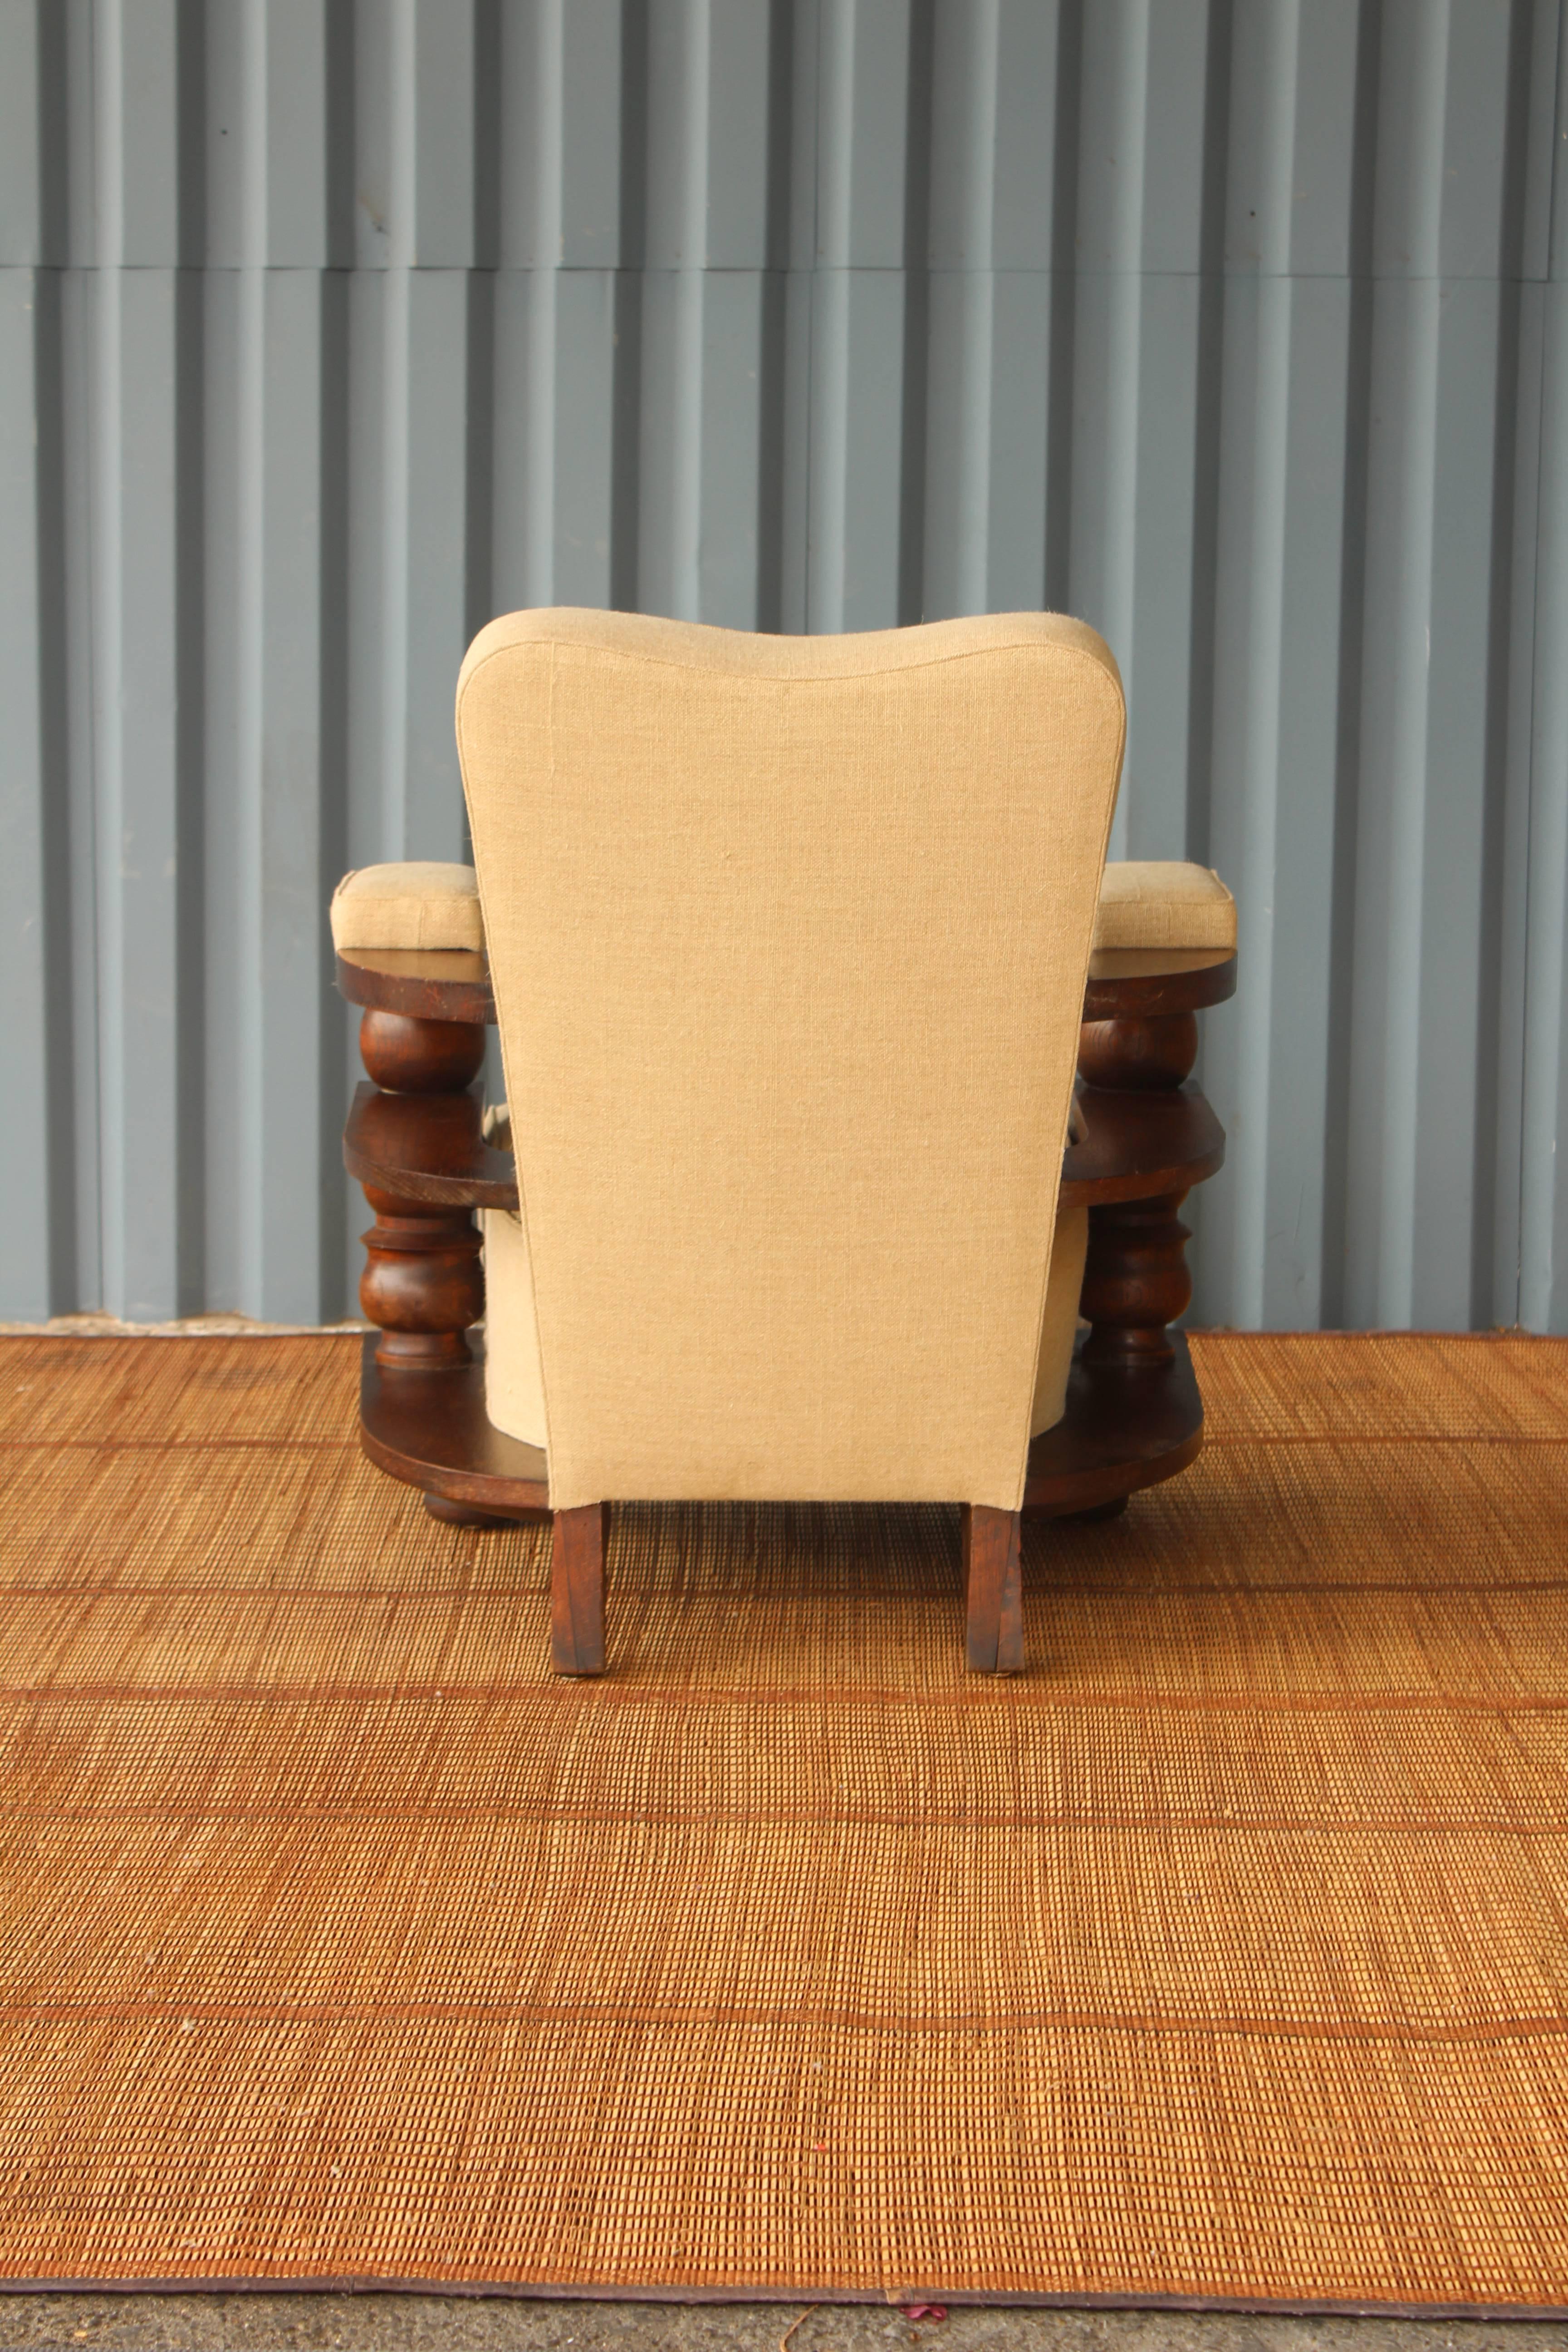 Wood Two Vintage Chairs from Biarritz